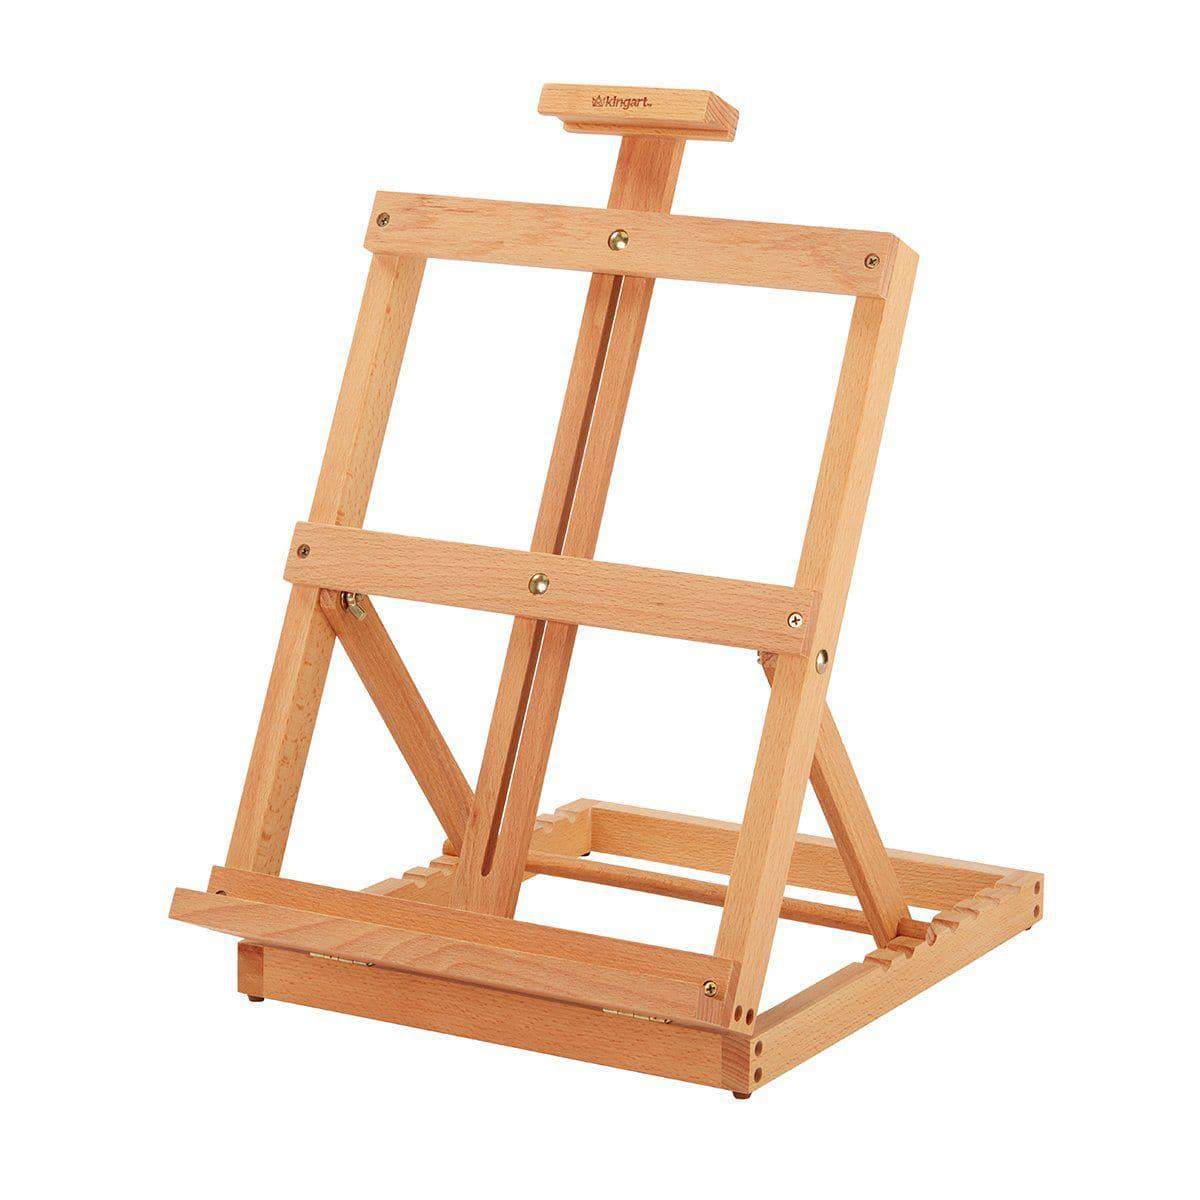 KINGART® Wooden Tabletop Easel with Metal-Lined Storage Drawer